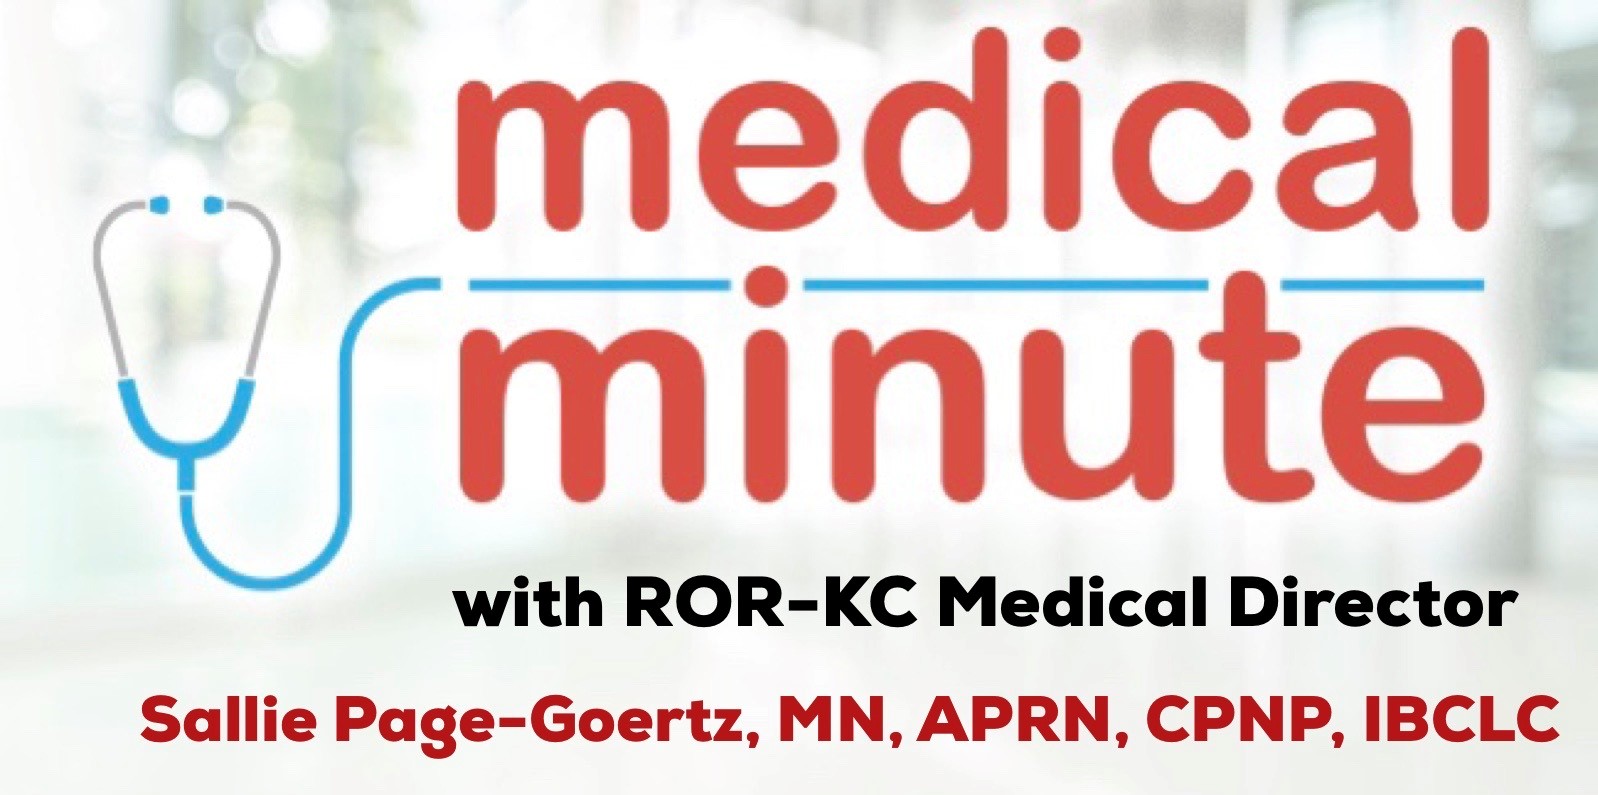 July’s Medical Minute